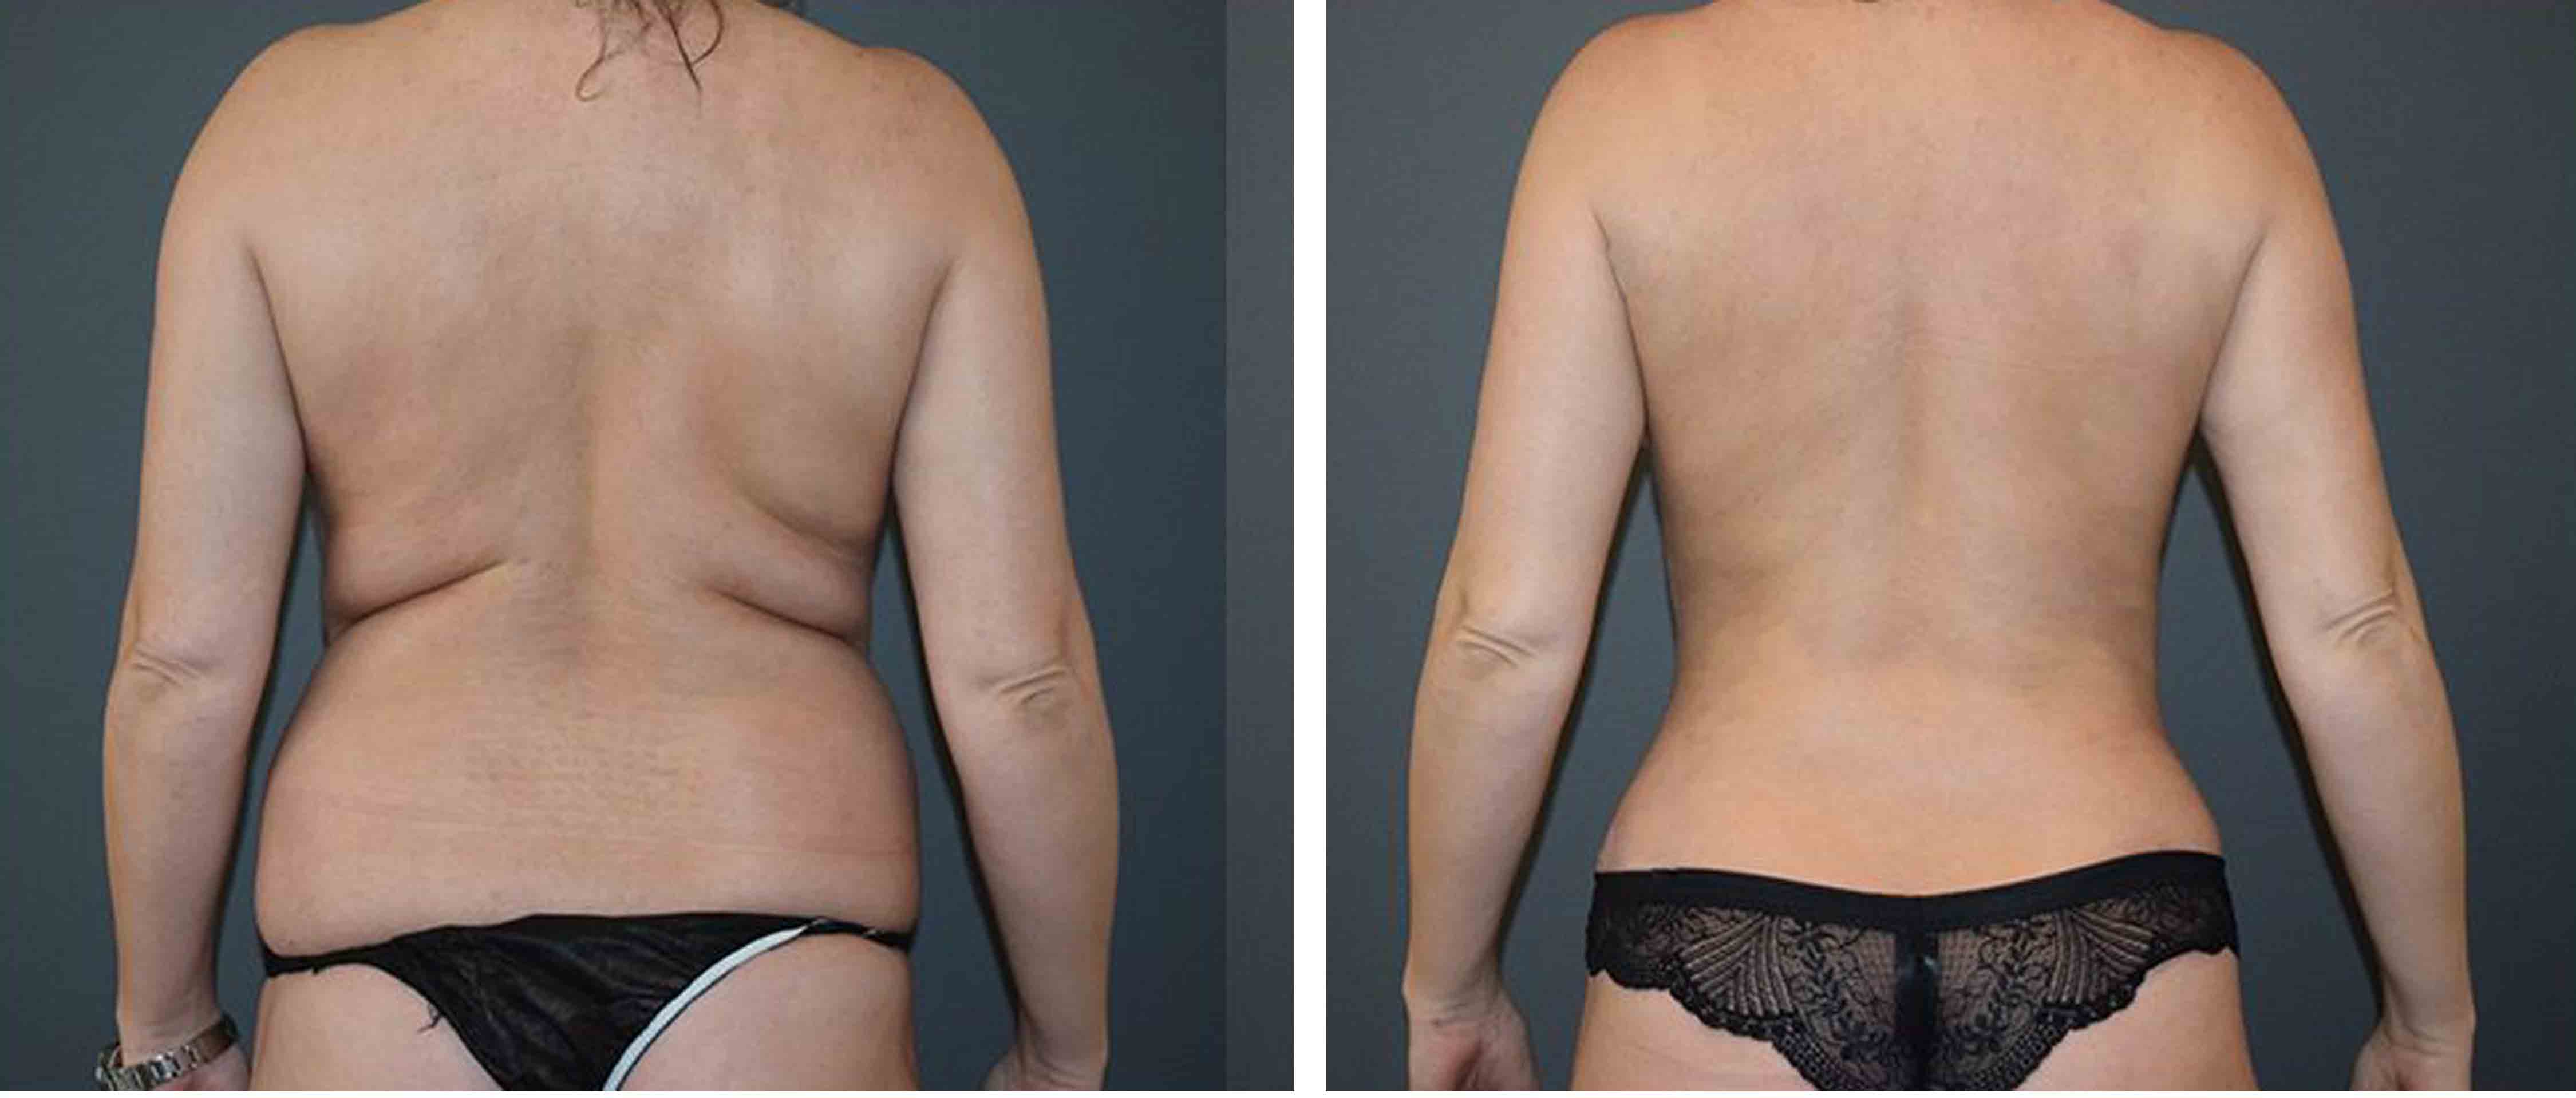 Liposuction before and After Love handles